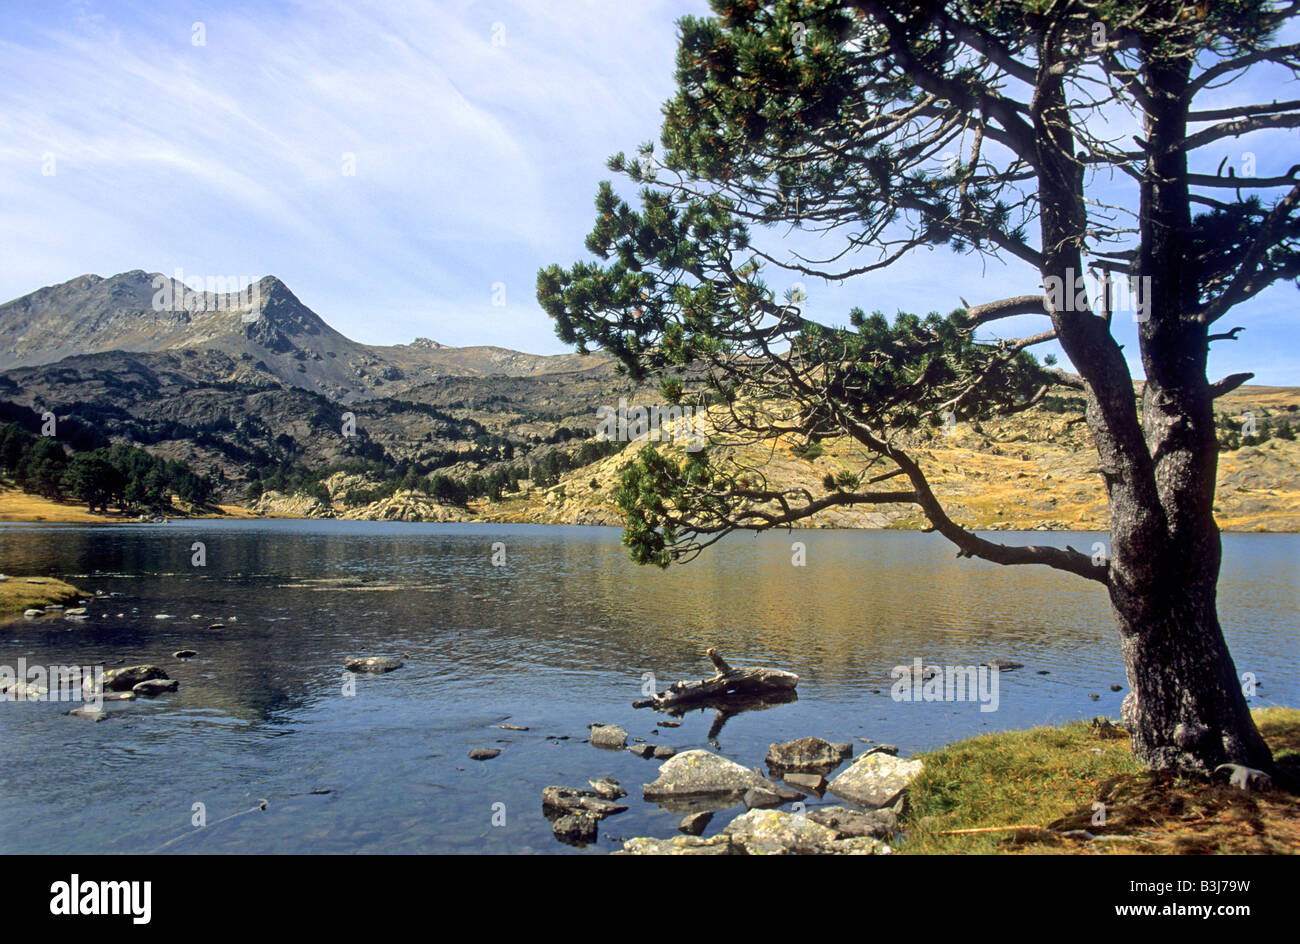 Pyrenees mountain lake - Massif of Carlit seen across the Lac des Bouillouses, Pyrenees-Orientales, Languedoc-Roussillon, France Stock Photo